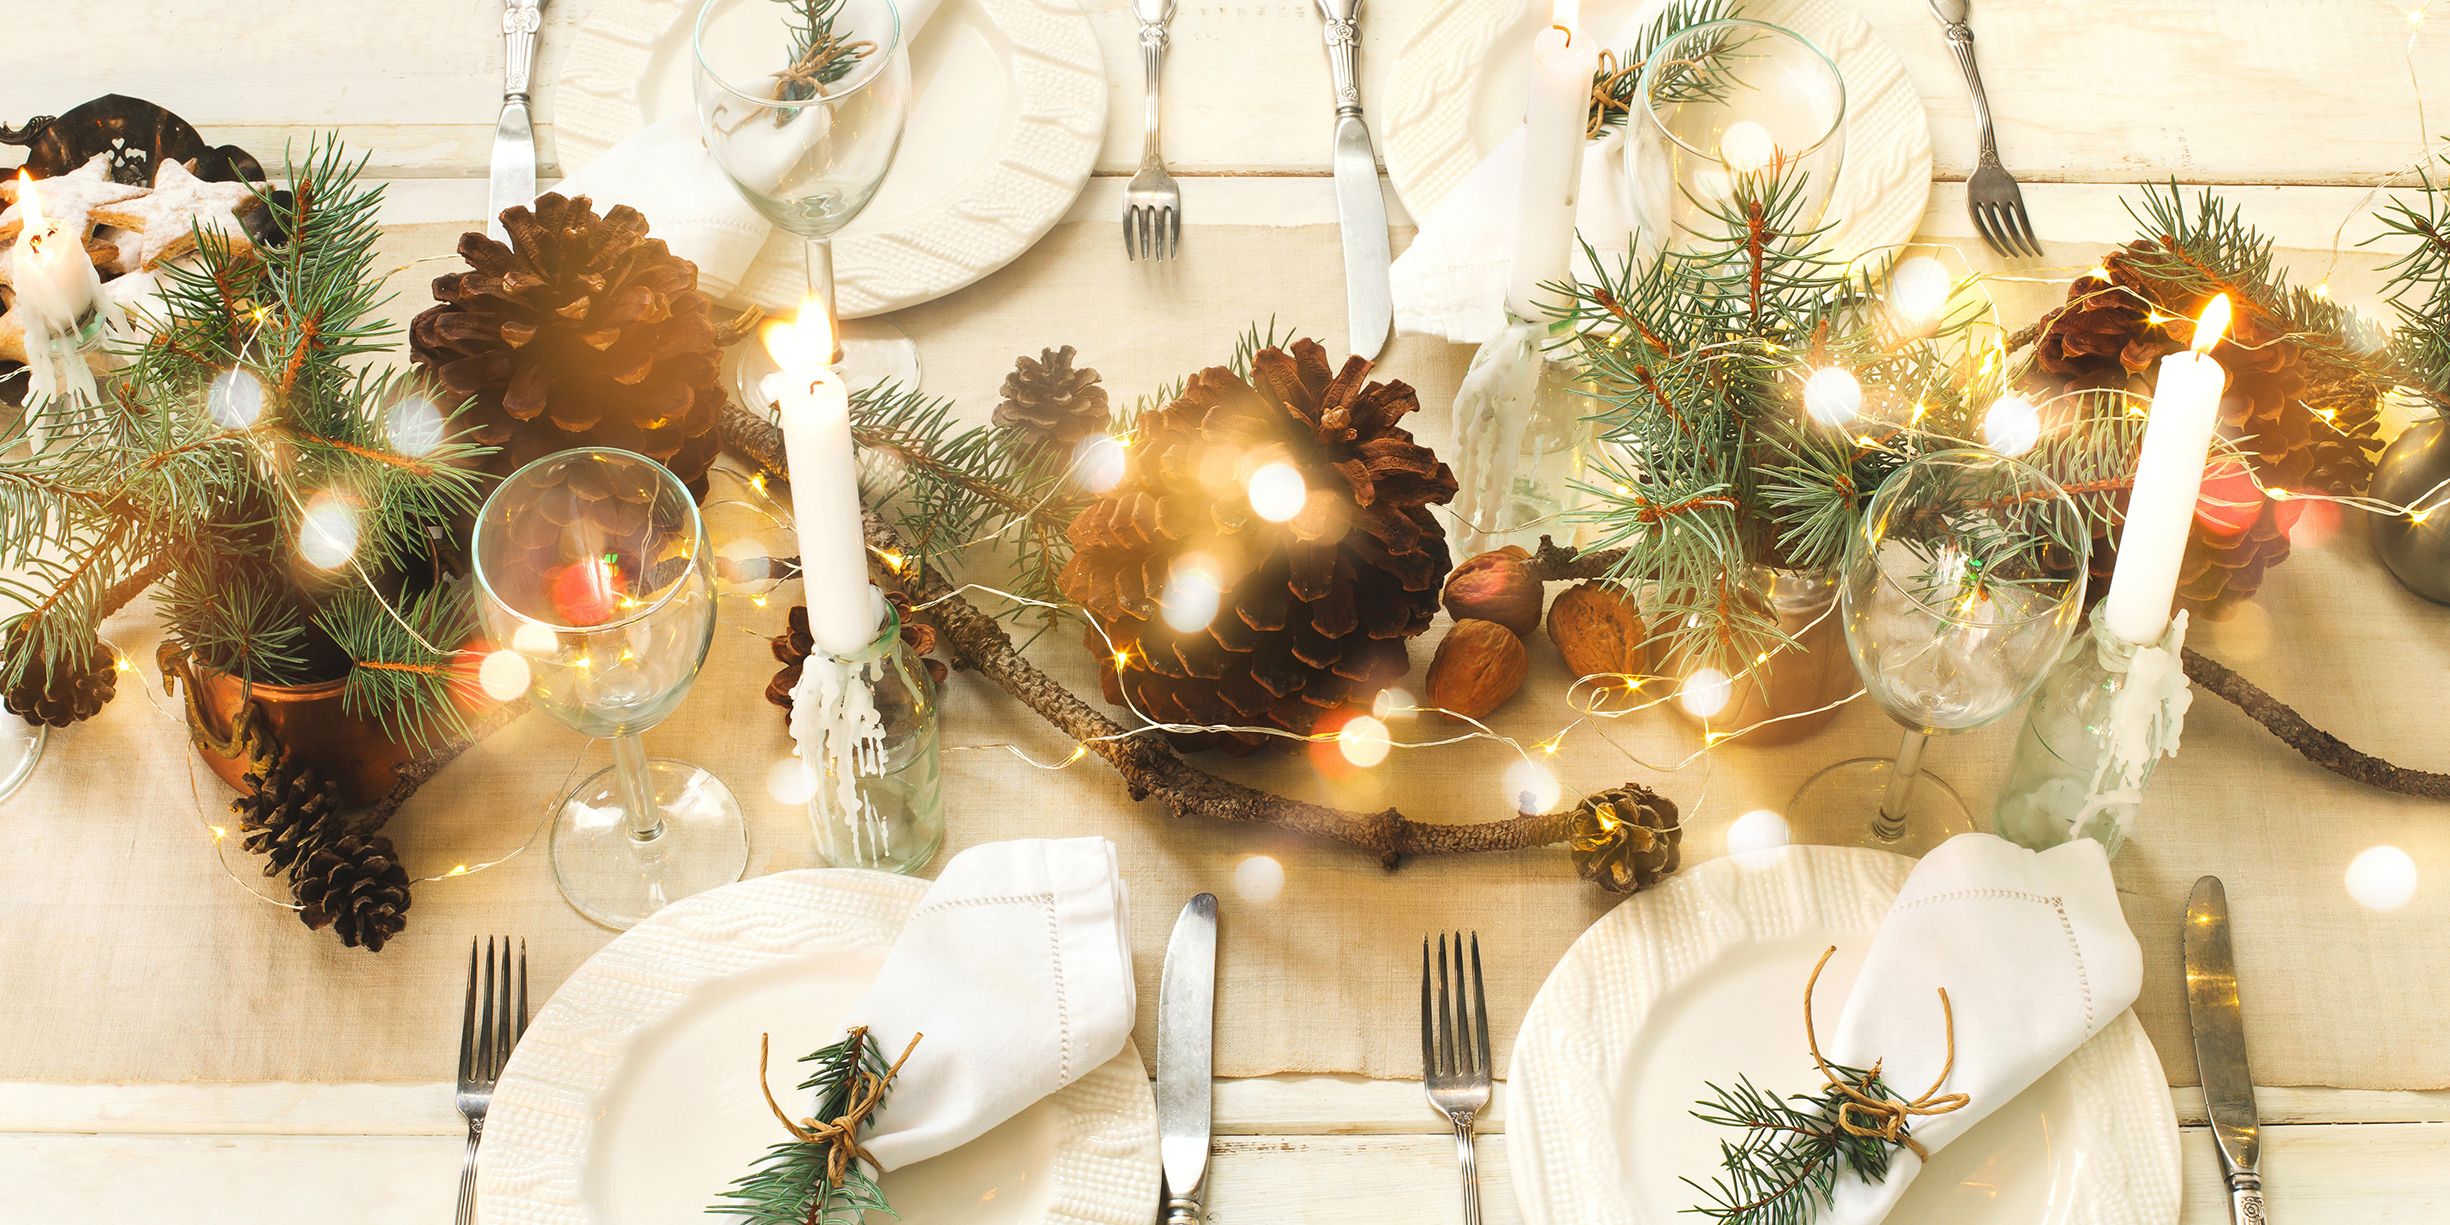 43 Best Christmas Table Settings Decorations And Centerpiece Ideas